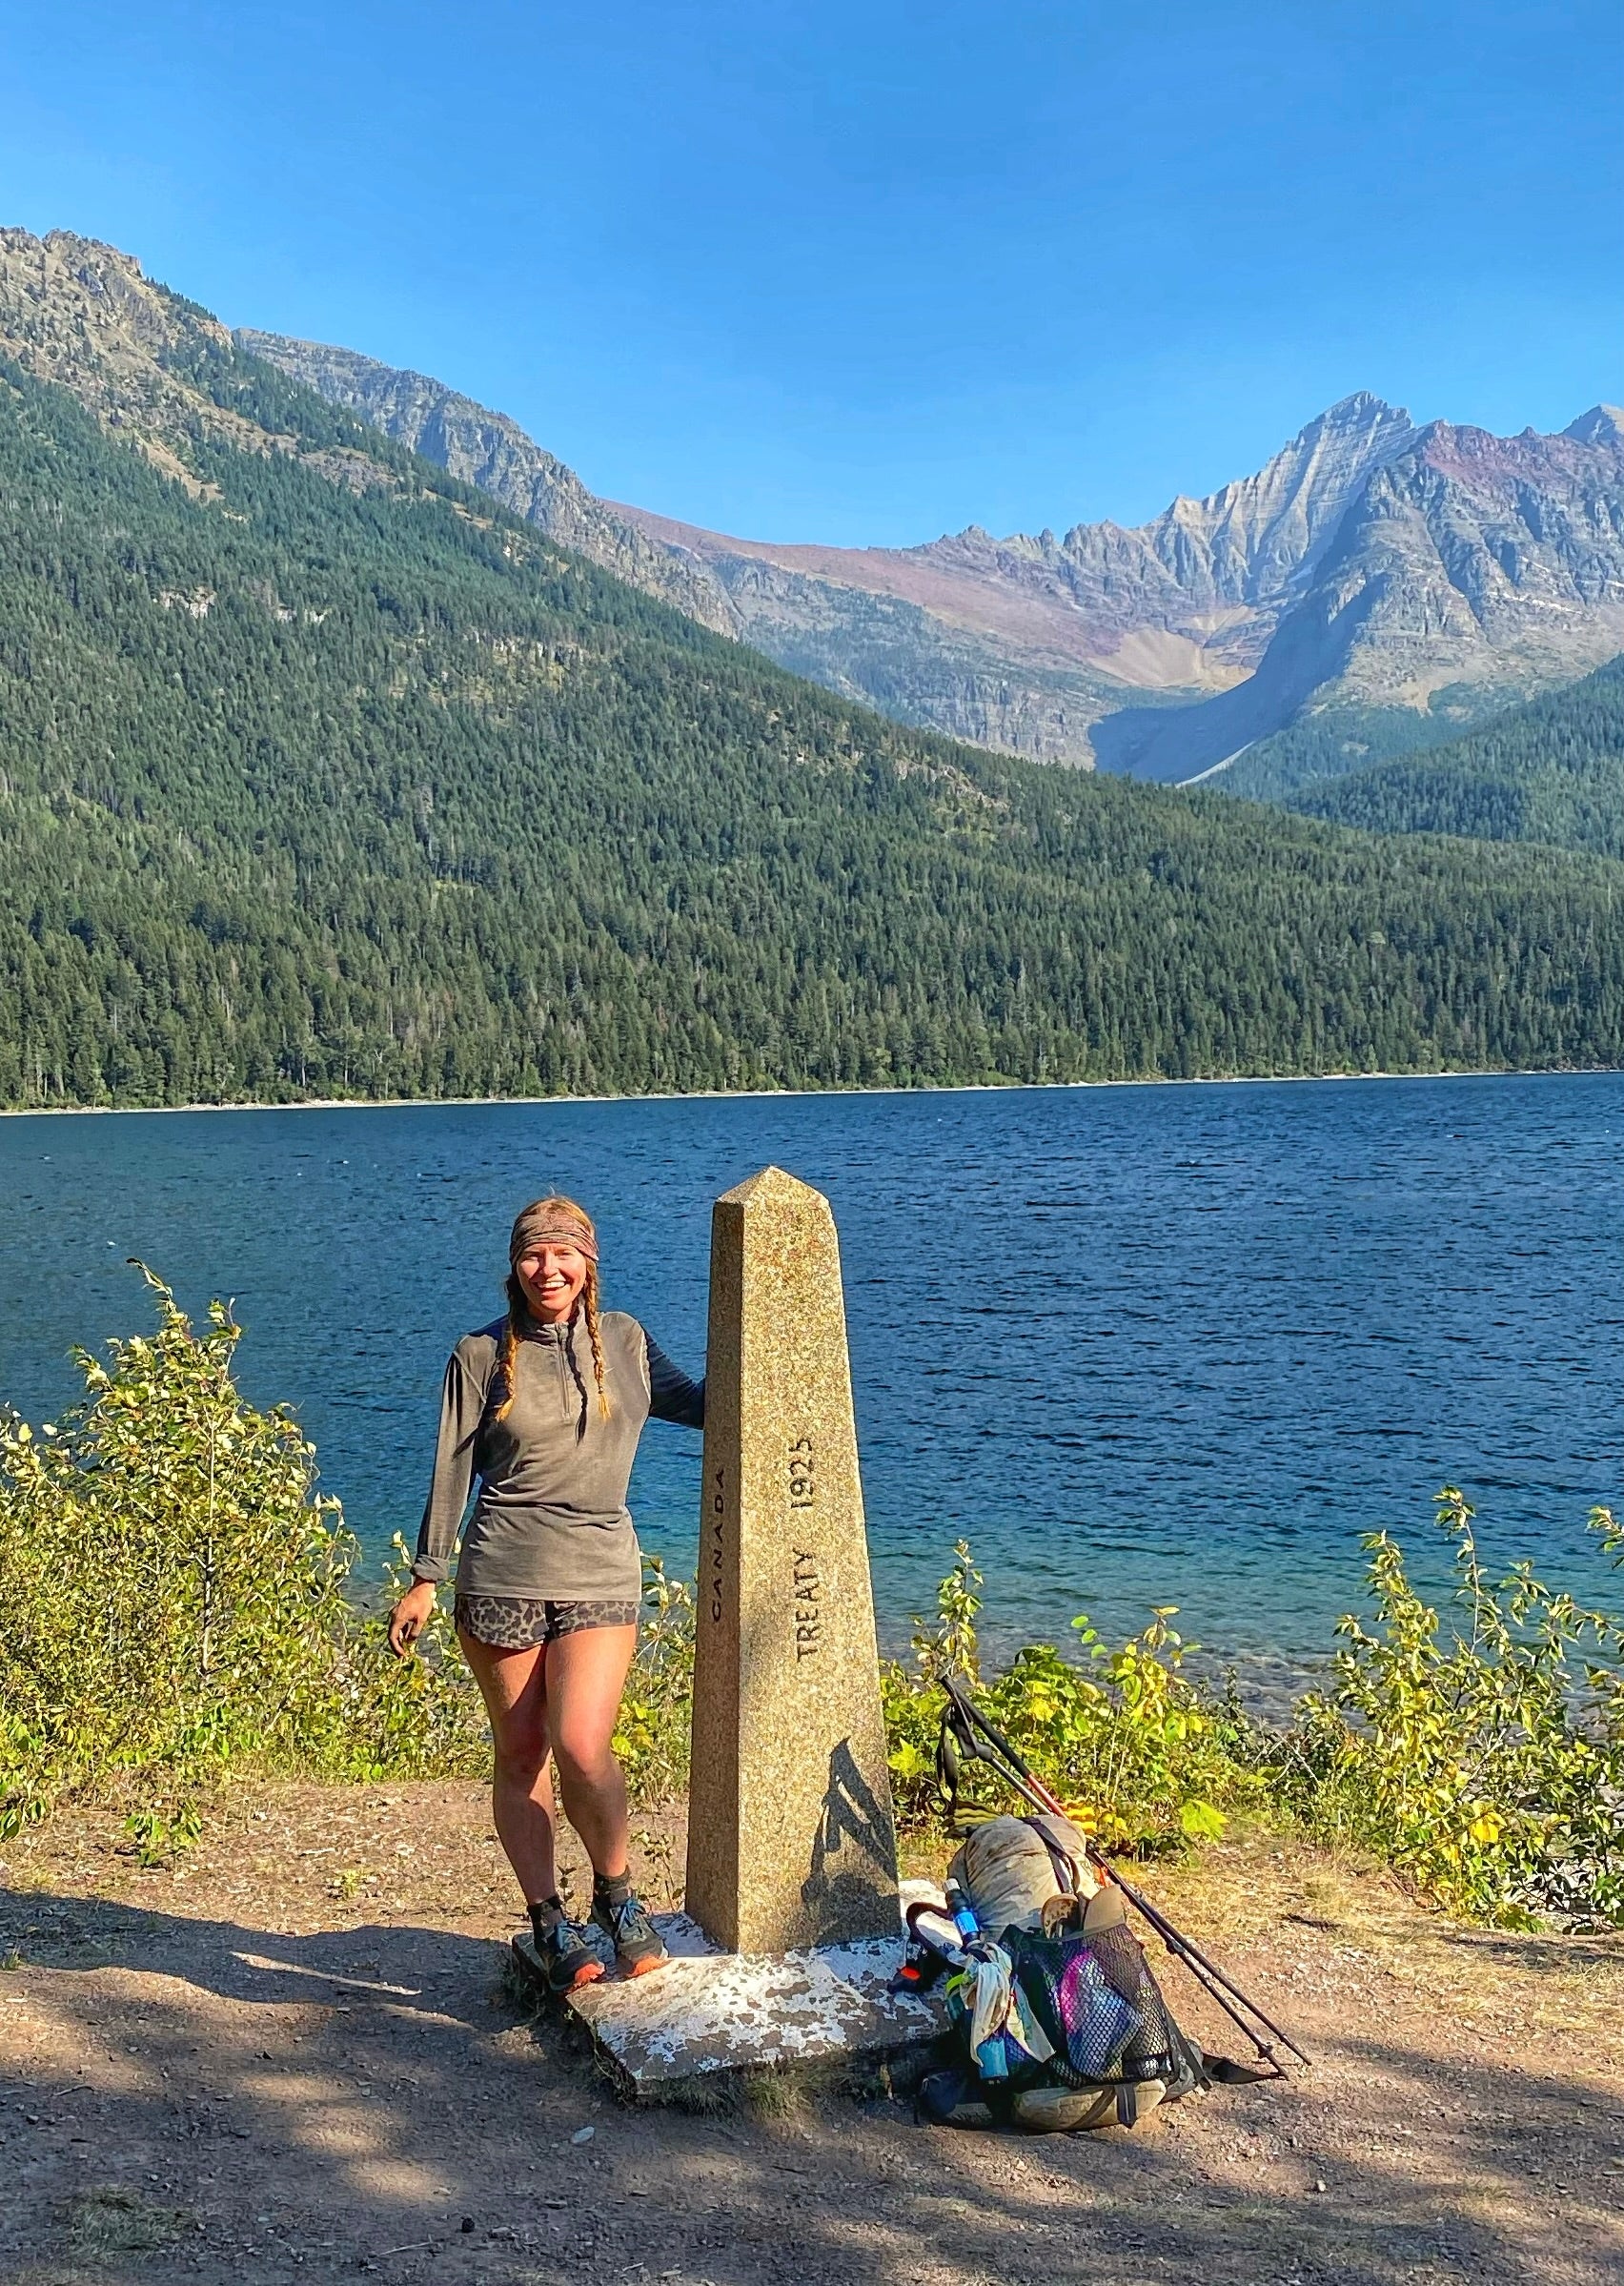 Thru-hiker Carol "Cheer" Coyne standing at the CDT finish and northern terminus at Waterton Lake on the Canadian border.